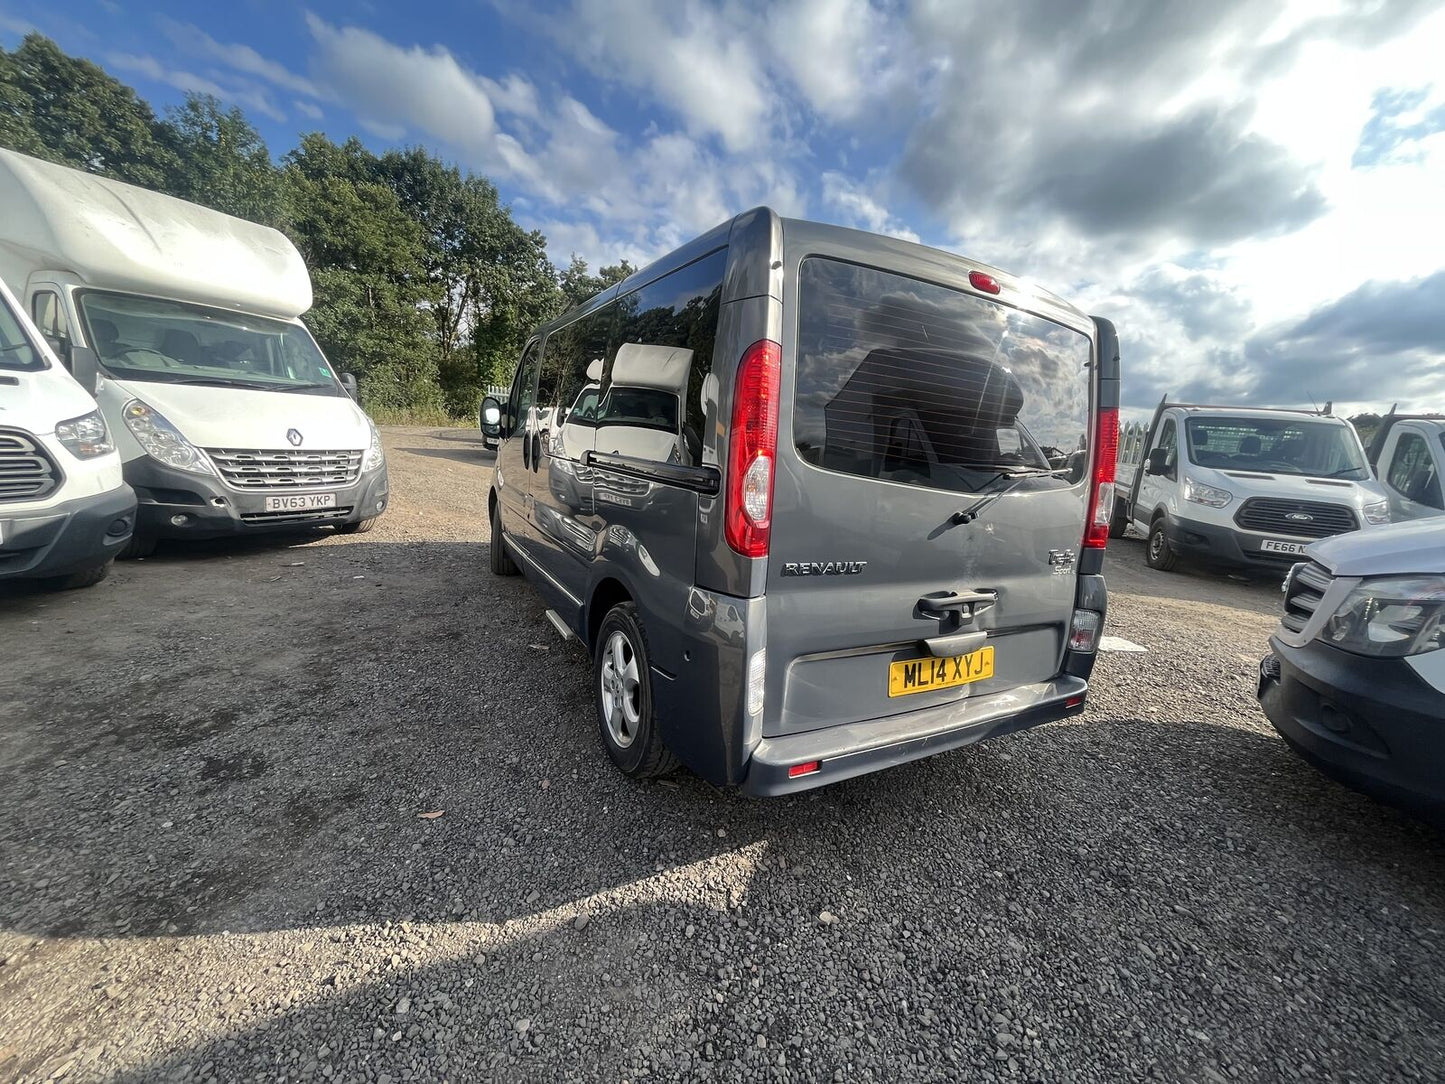 Bid on 2014 RENAULT TRAFIC MINIBUS: 9-SEATER LUXURY IN GREY, 9 SEATER DIESEL- Buy &amp; Sell on Auction with EAMA Group